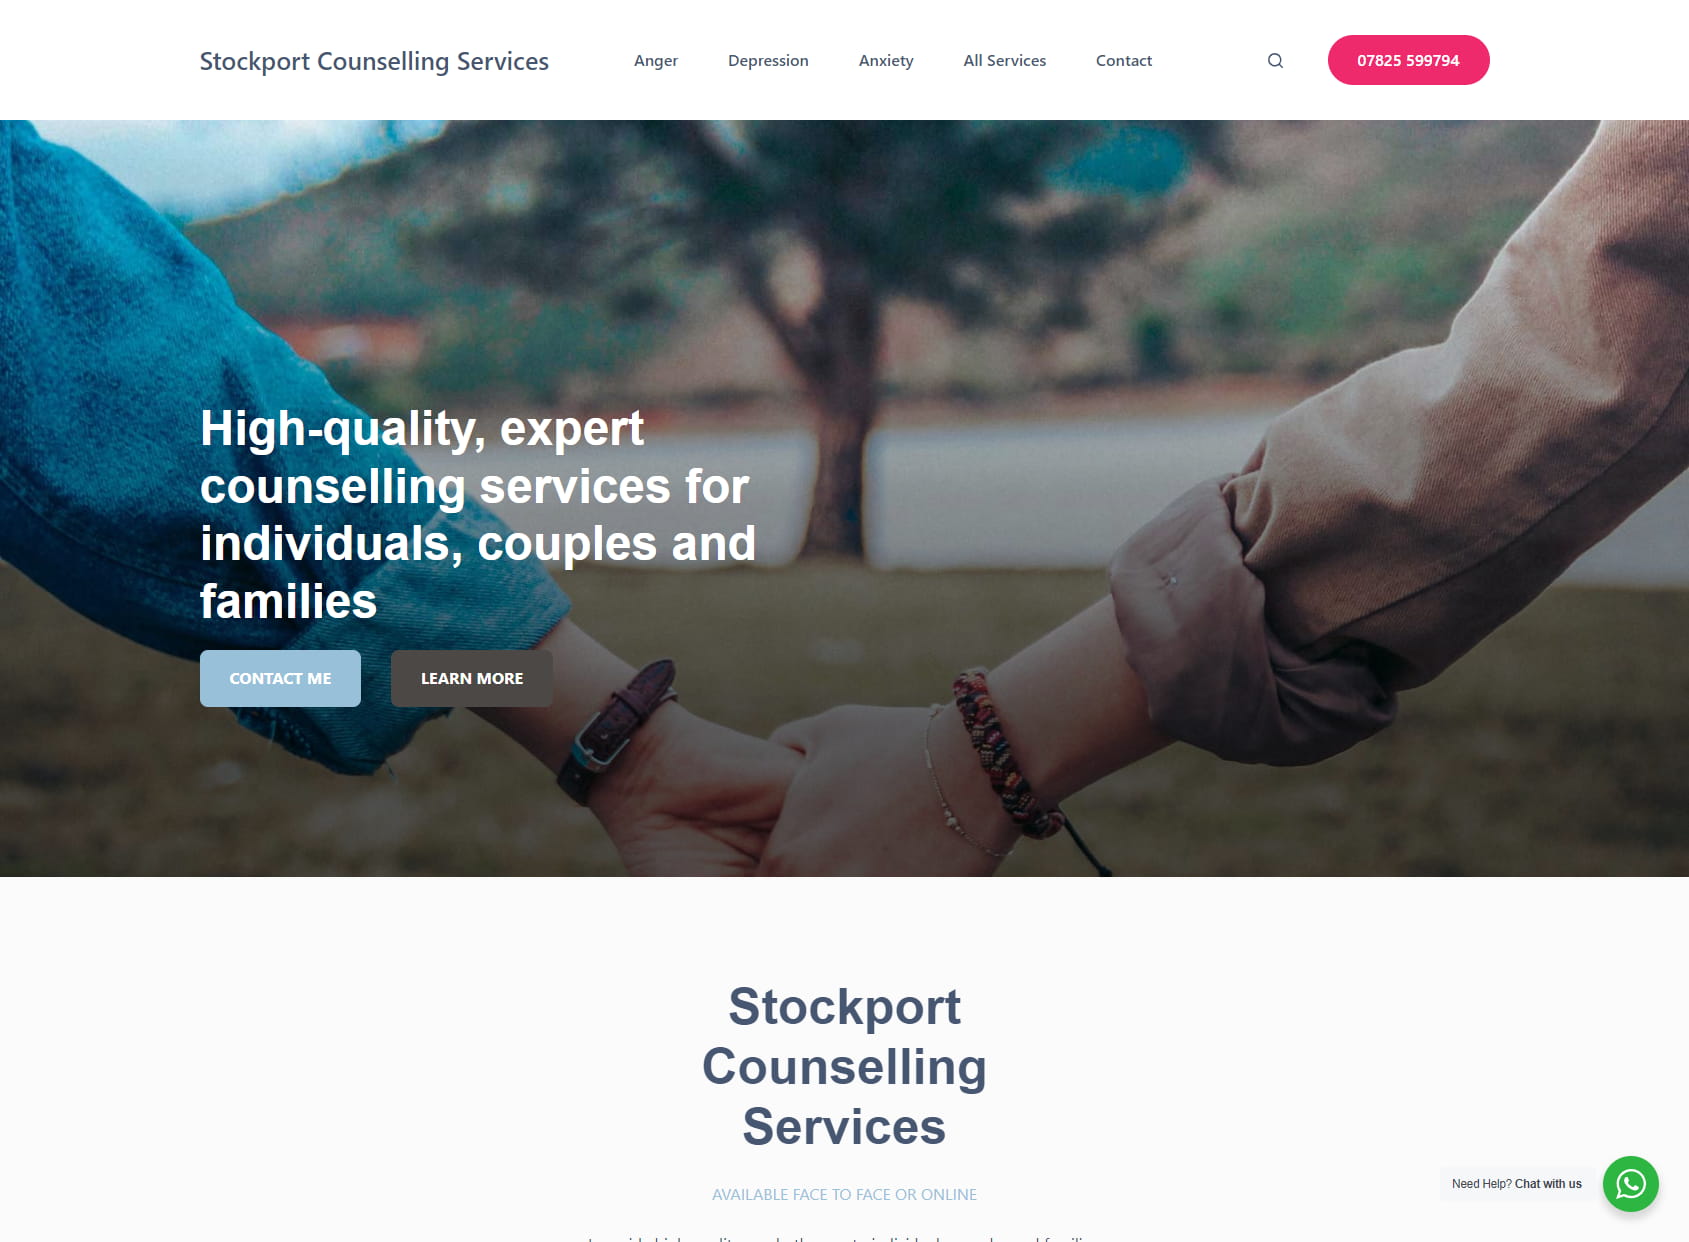 Stockport Counselling Services